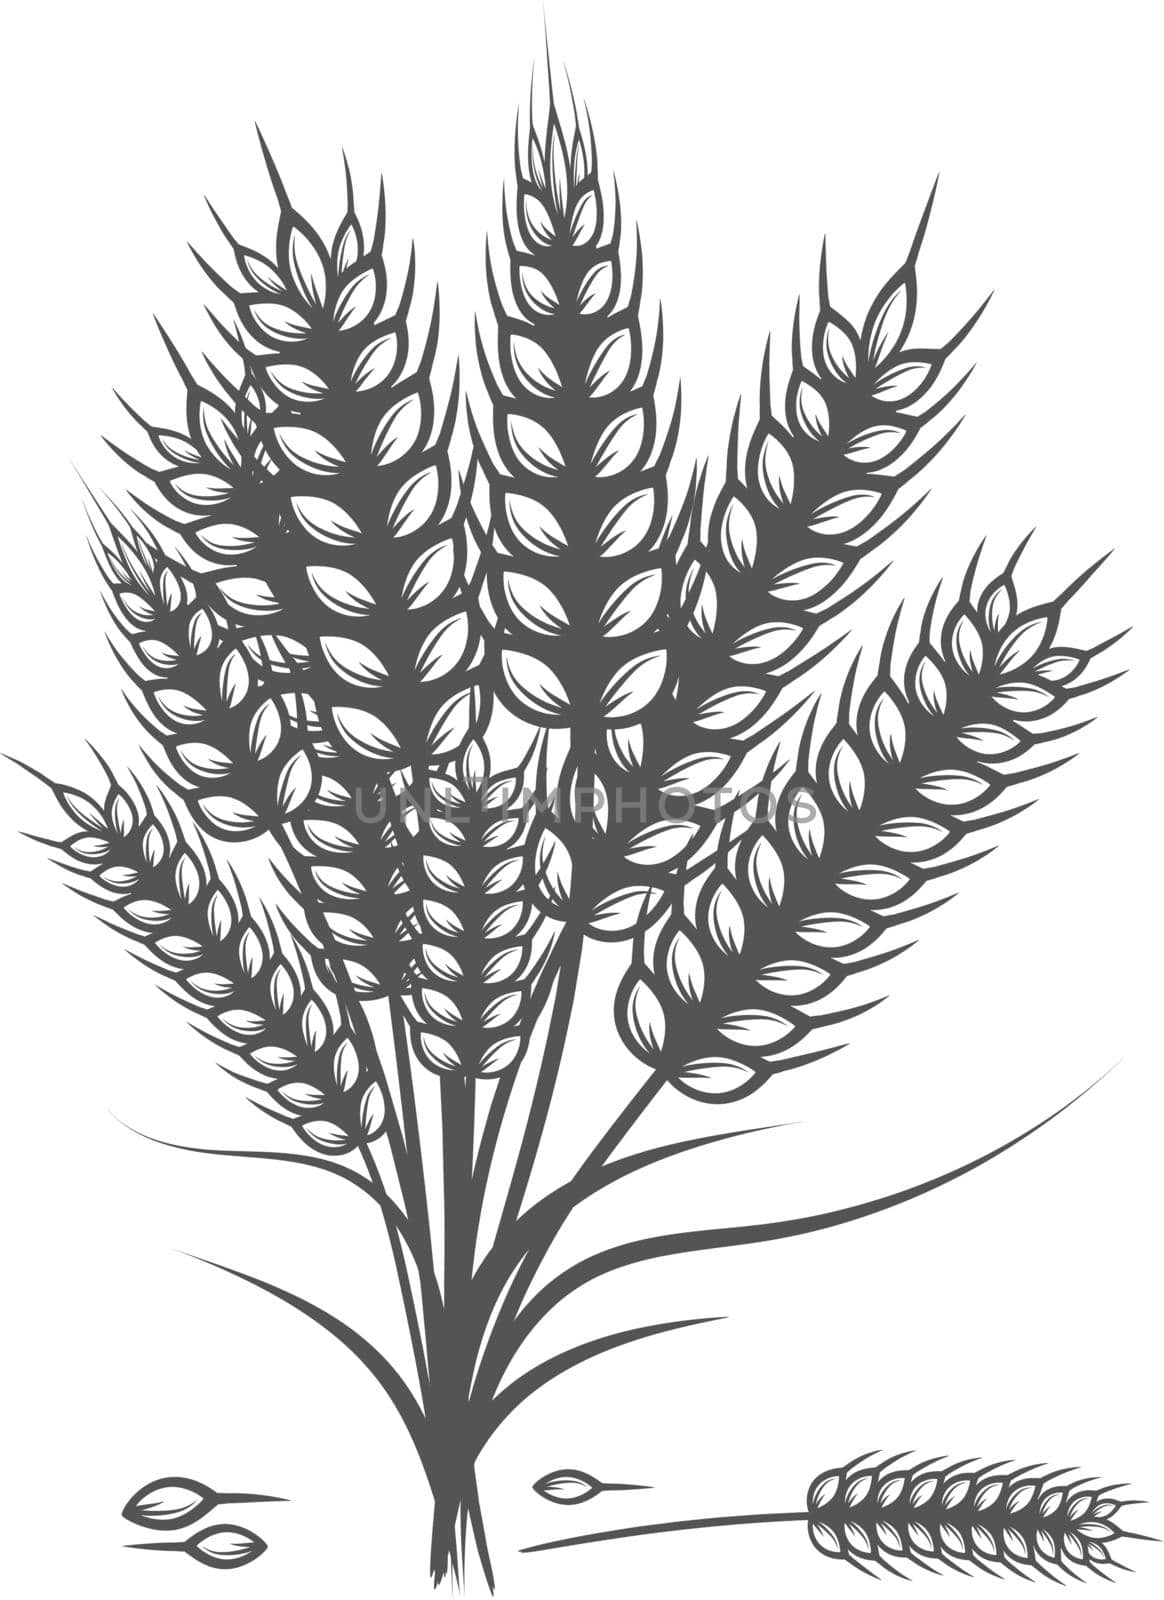 Wheat bread ears cereal crop sketch hand drawn vector illustration. Black ear isolated on white background. by biruzza